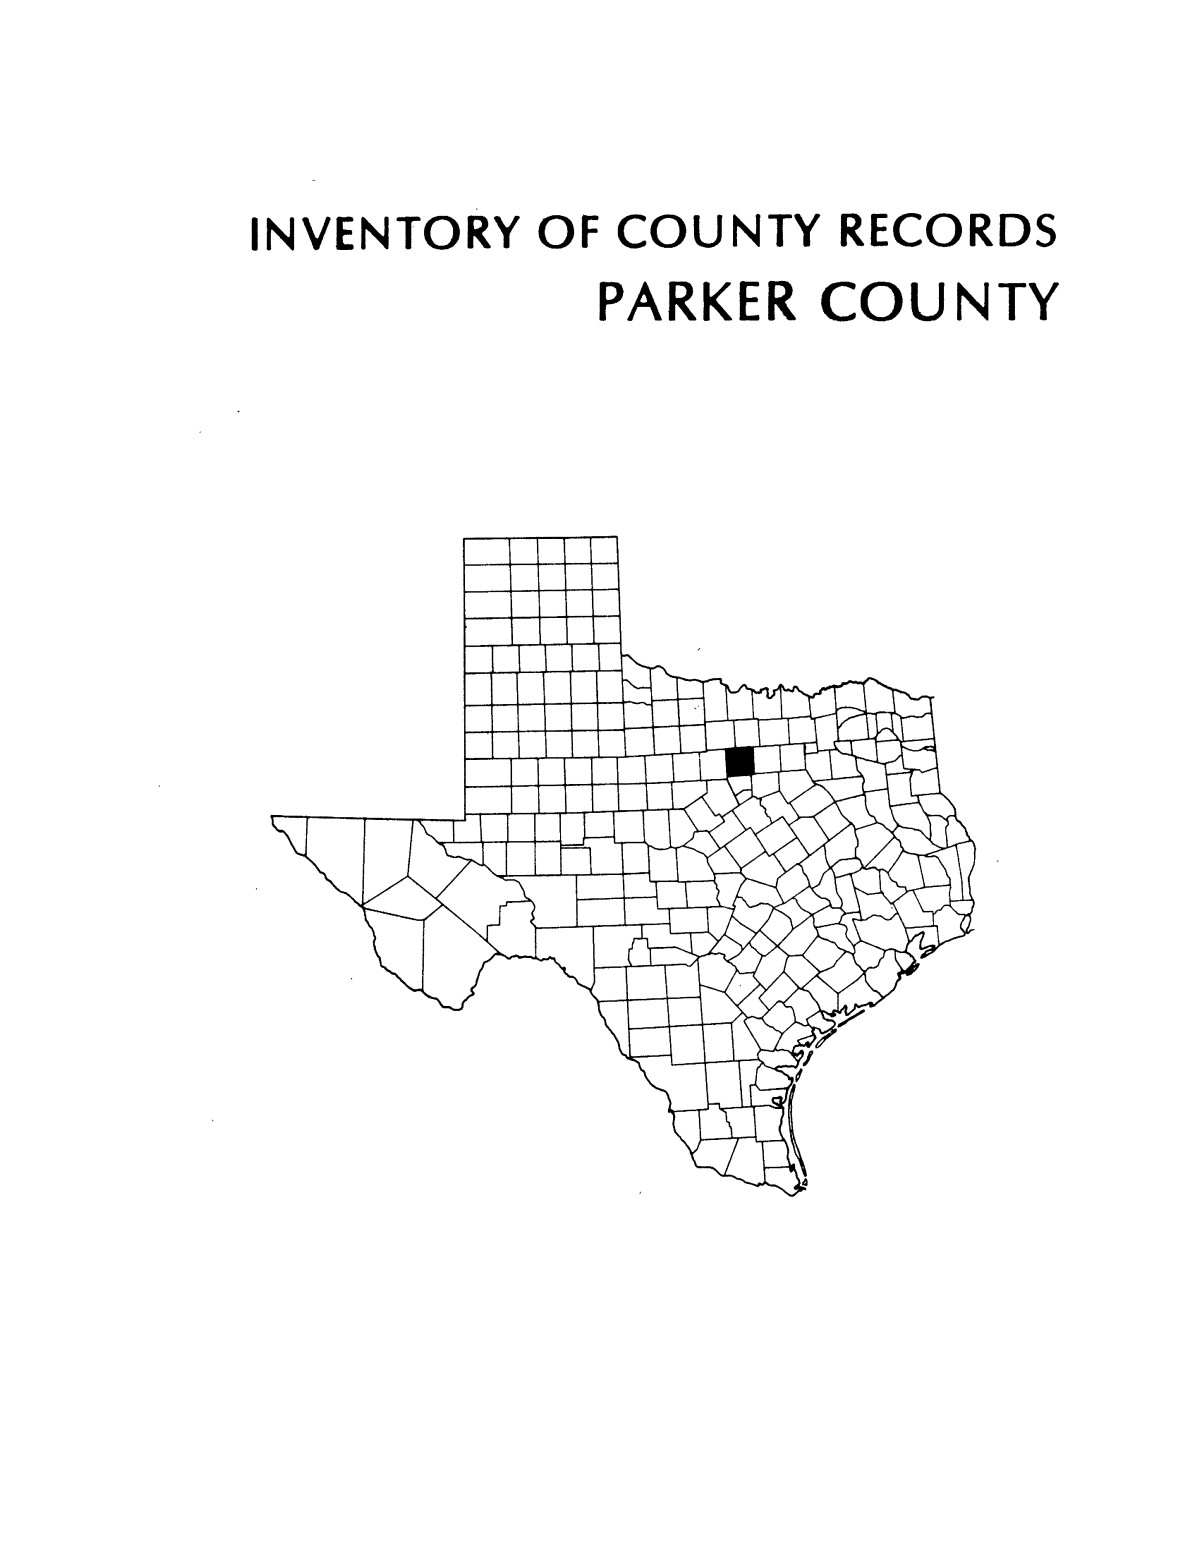 Inventory of county records Parker County courthouse Weatherford